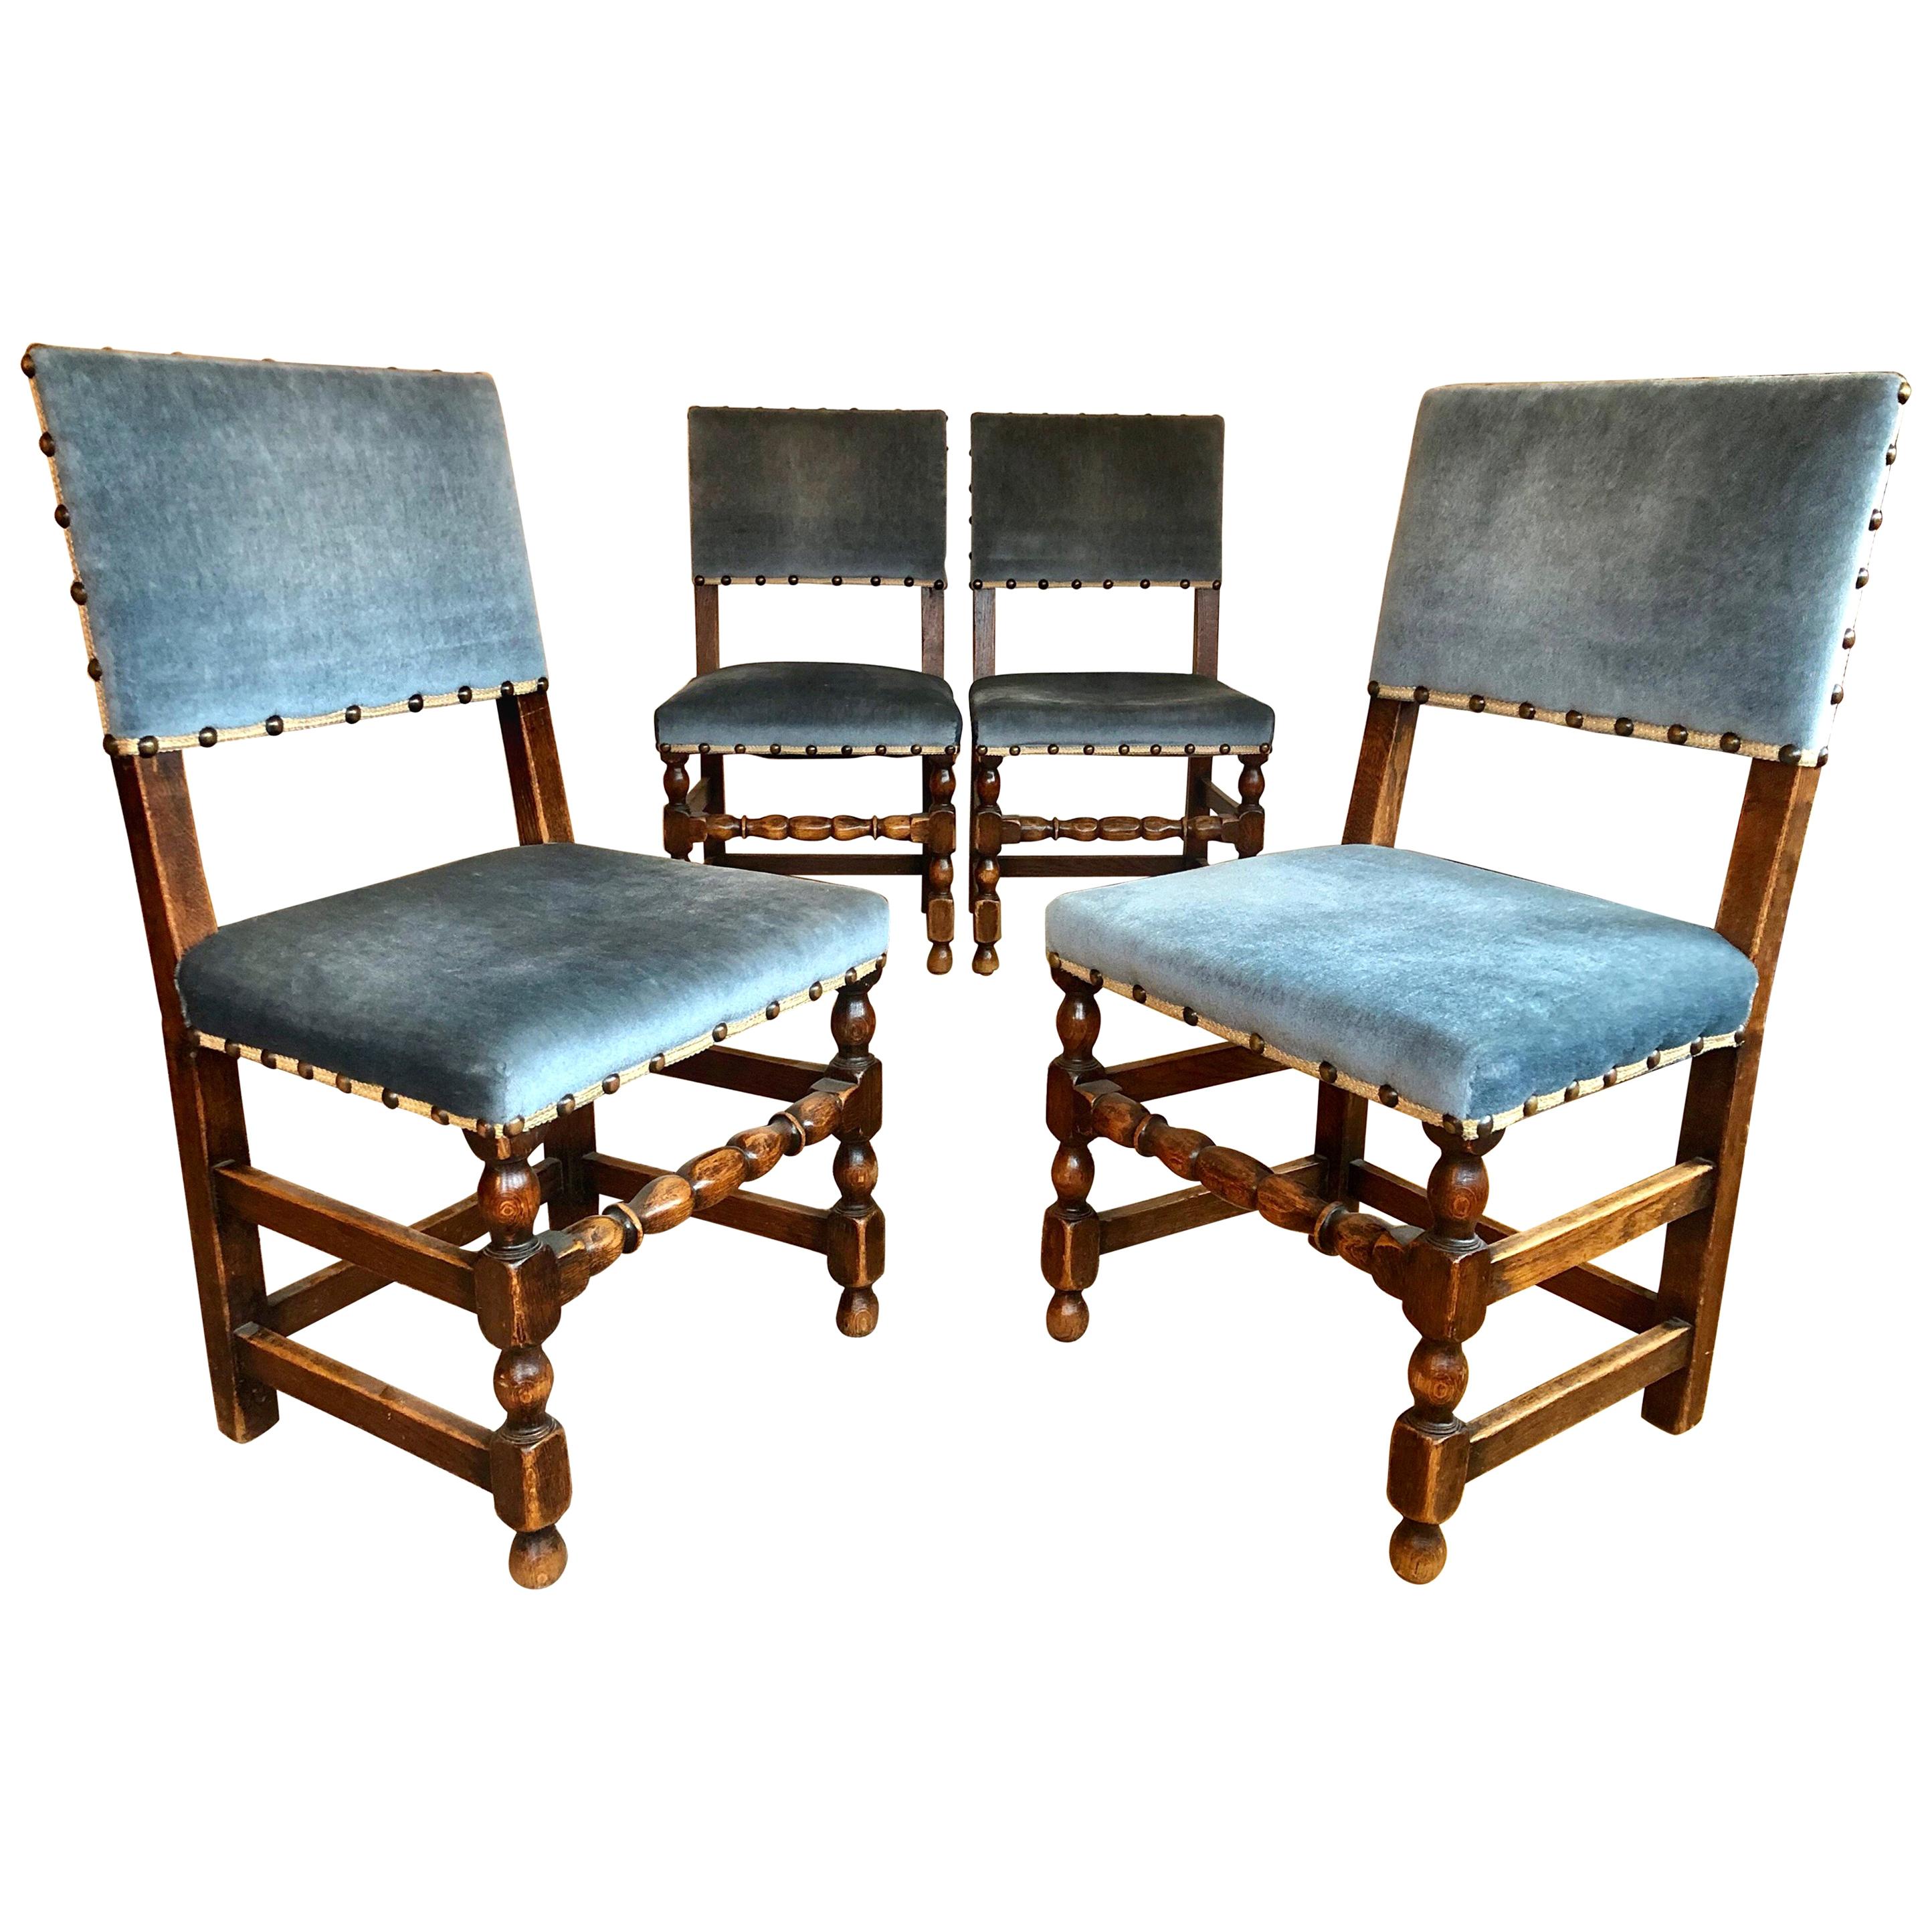 CLEARANCE Set of 4 French Country Provincial Rustic Blue Dining Castle Chairs